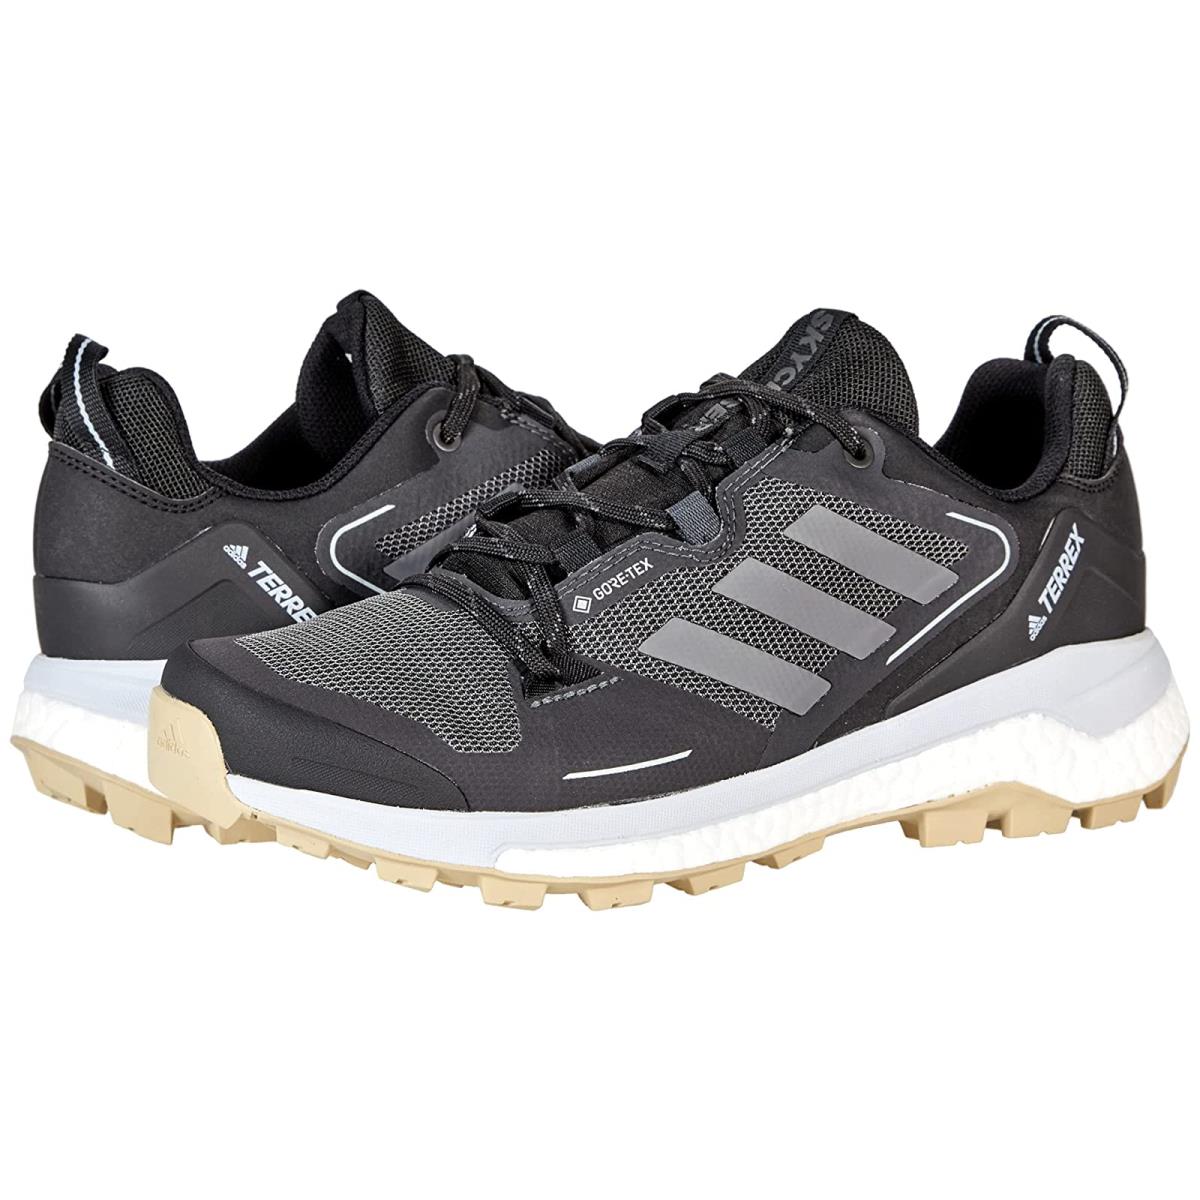 Woman`s Shoes Adidas Outdoor Terrex Skychaser 2 Gore-tex Shoes Core Black/Halo Silver/Halo Blue